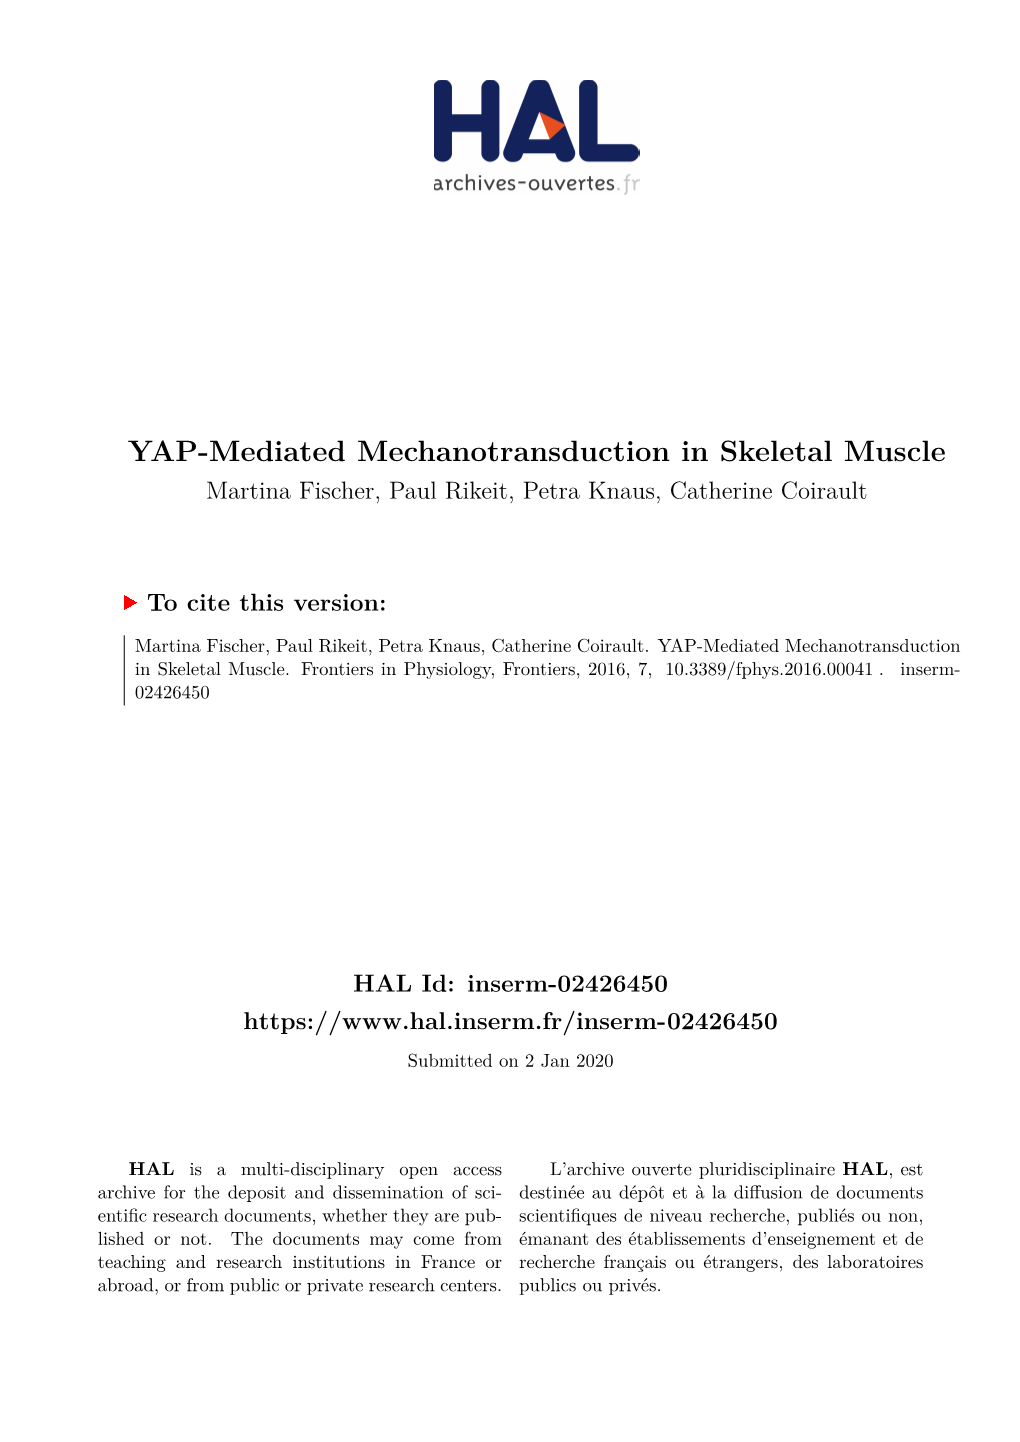 YAP-Mediated Mechanotransduction in Skeletal Muscle Martina Fischer, Paul Rikeit, Petra Knaus, Catherine Coirault